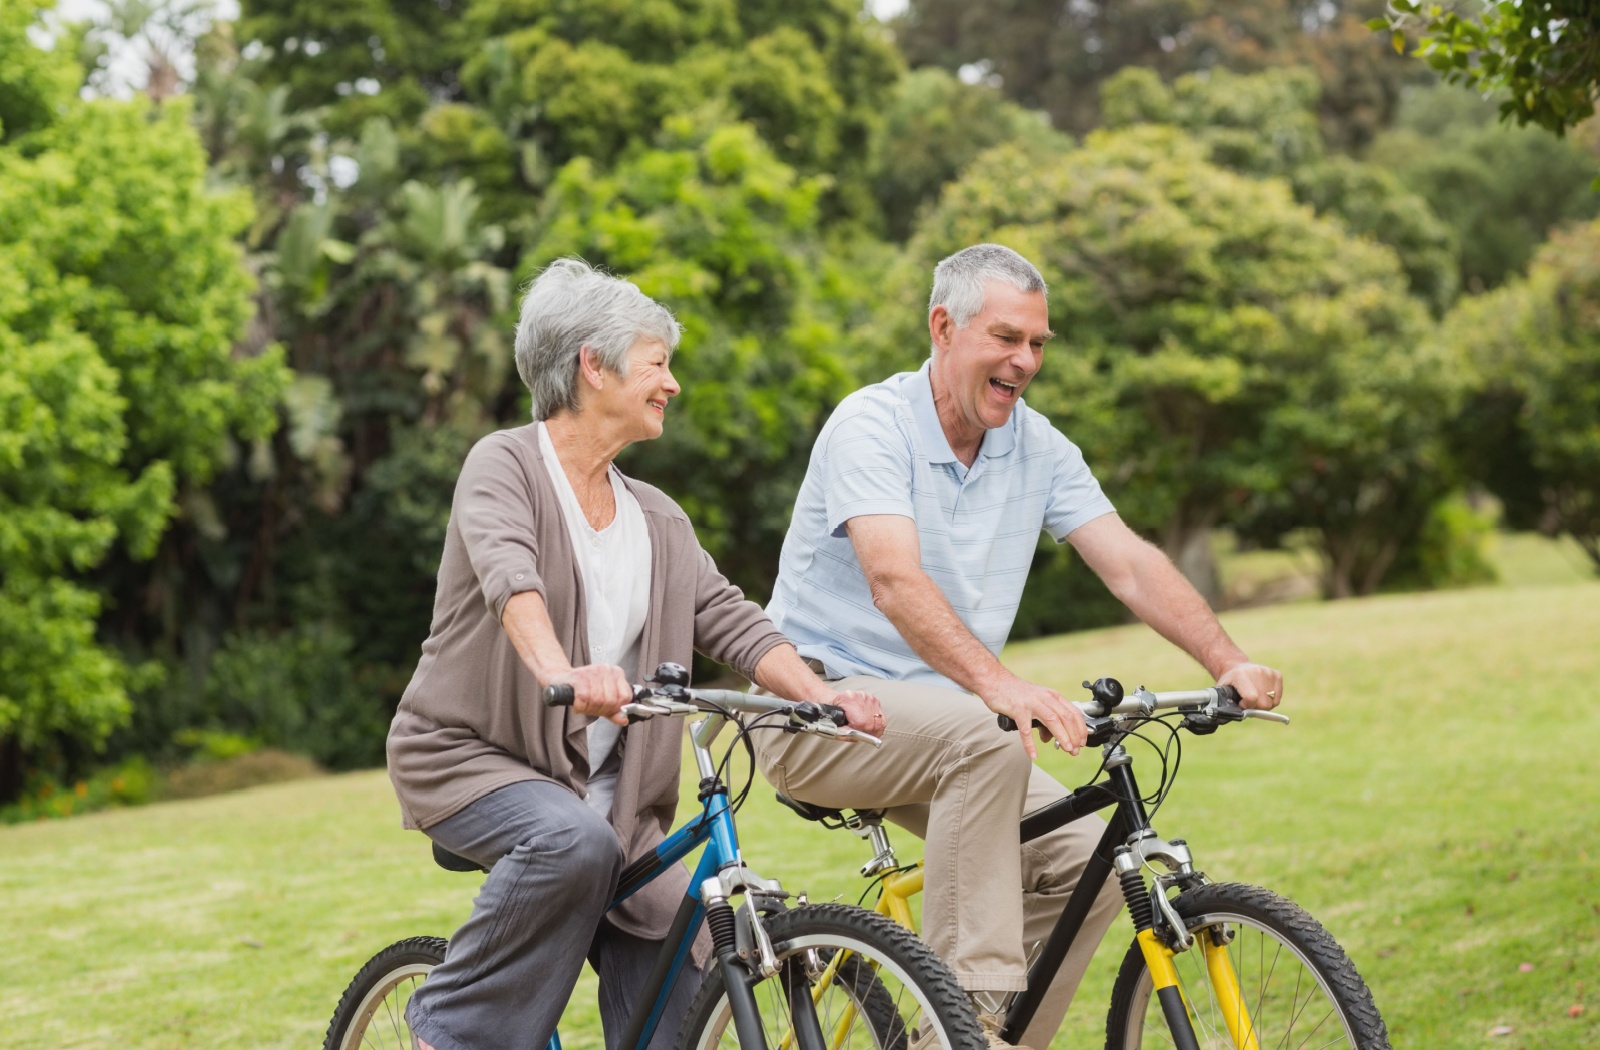 An older adult couple biking by the park.
